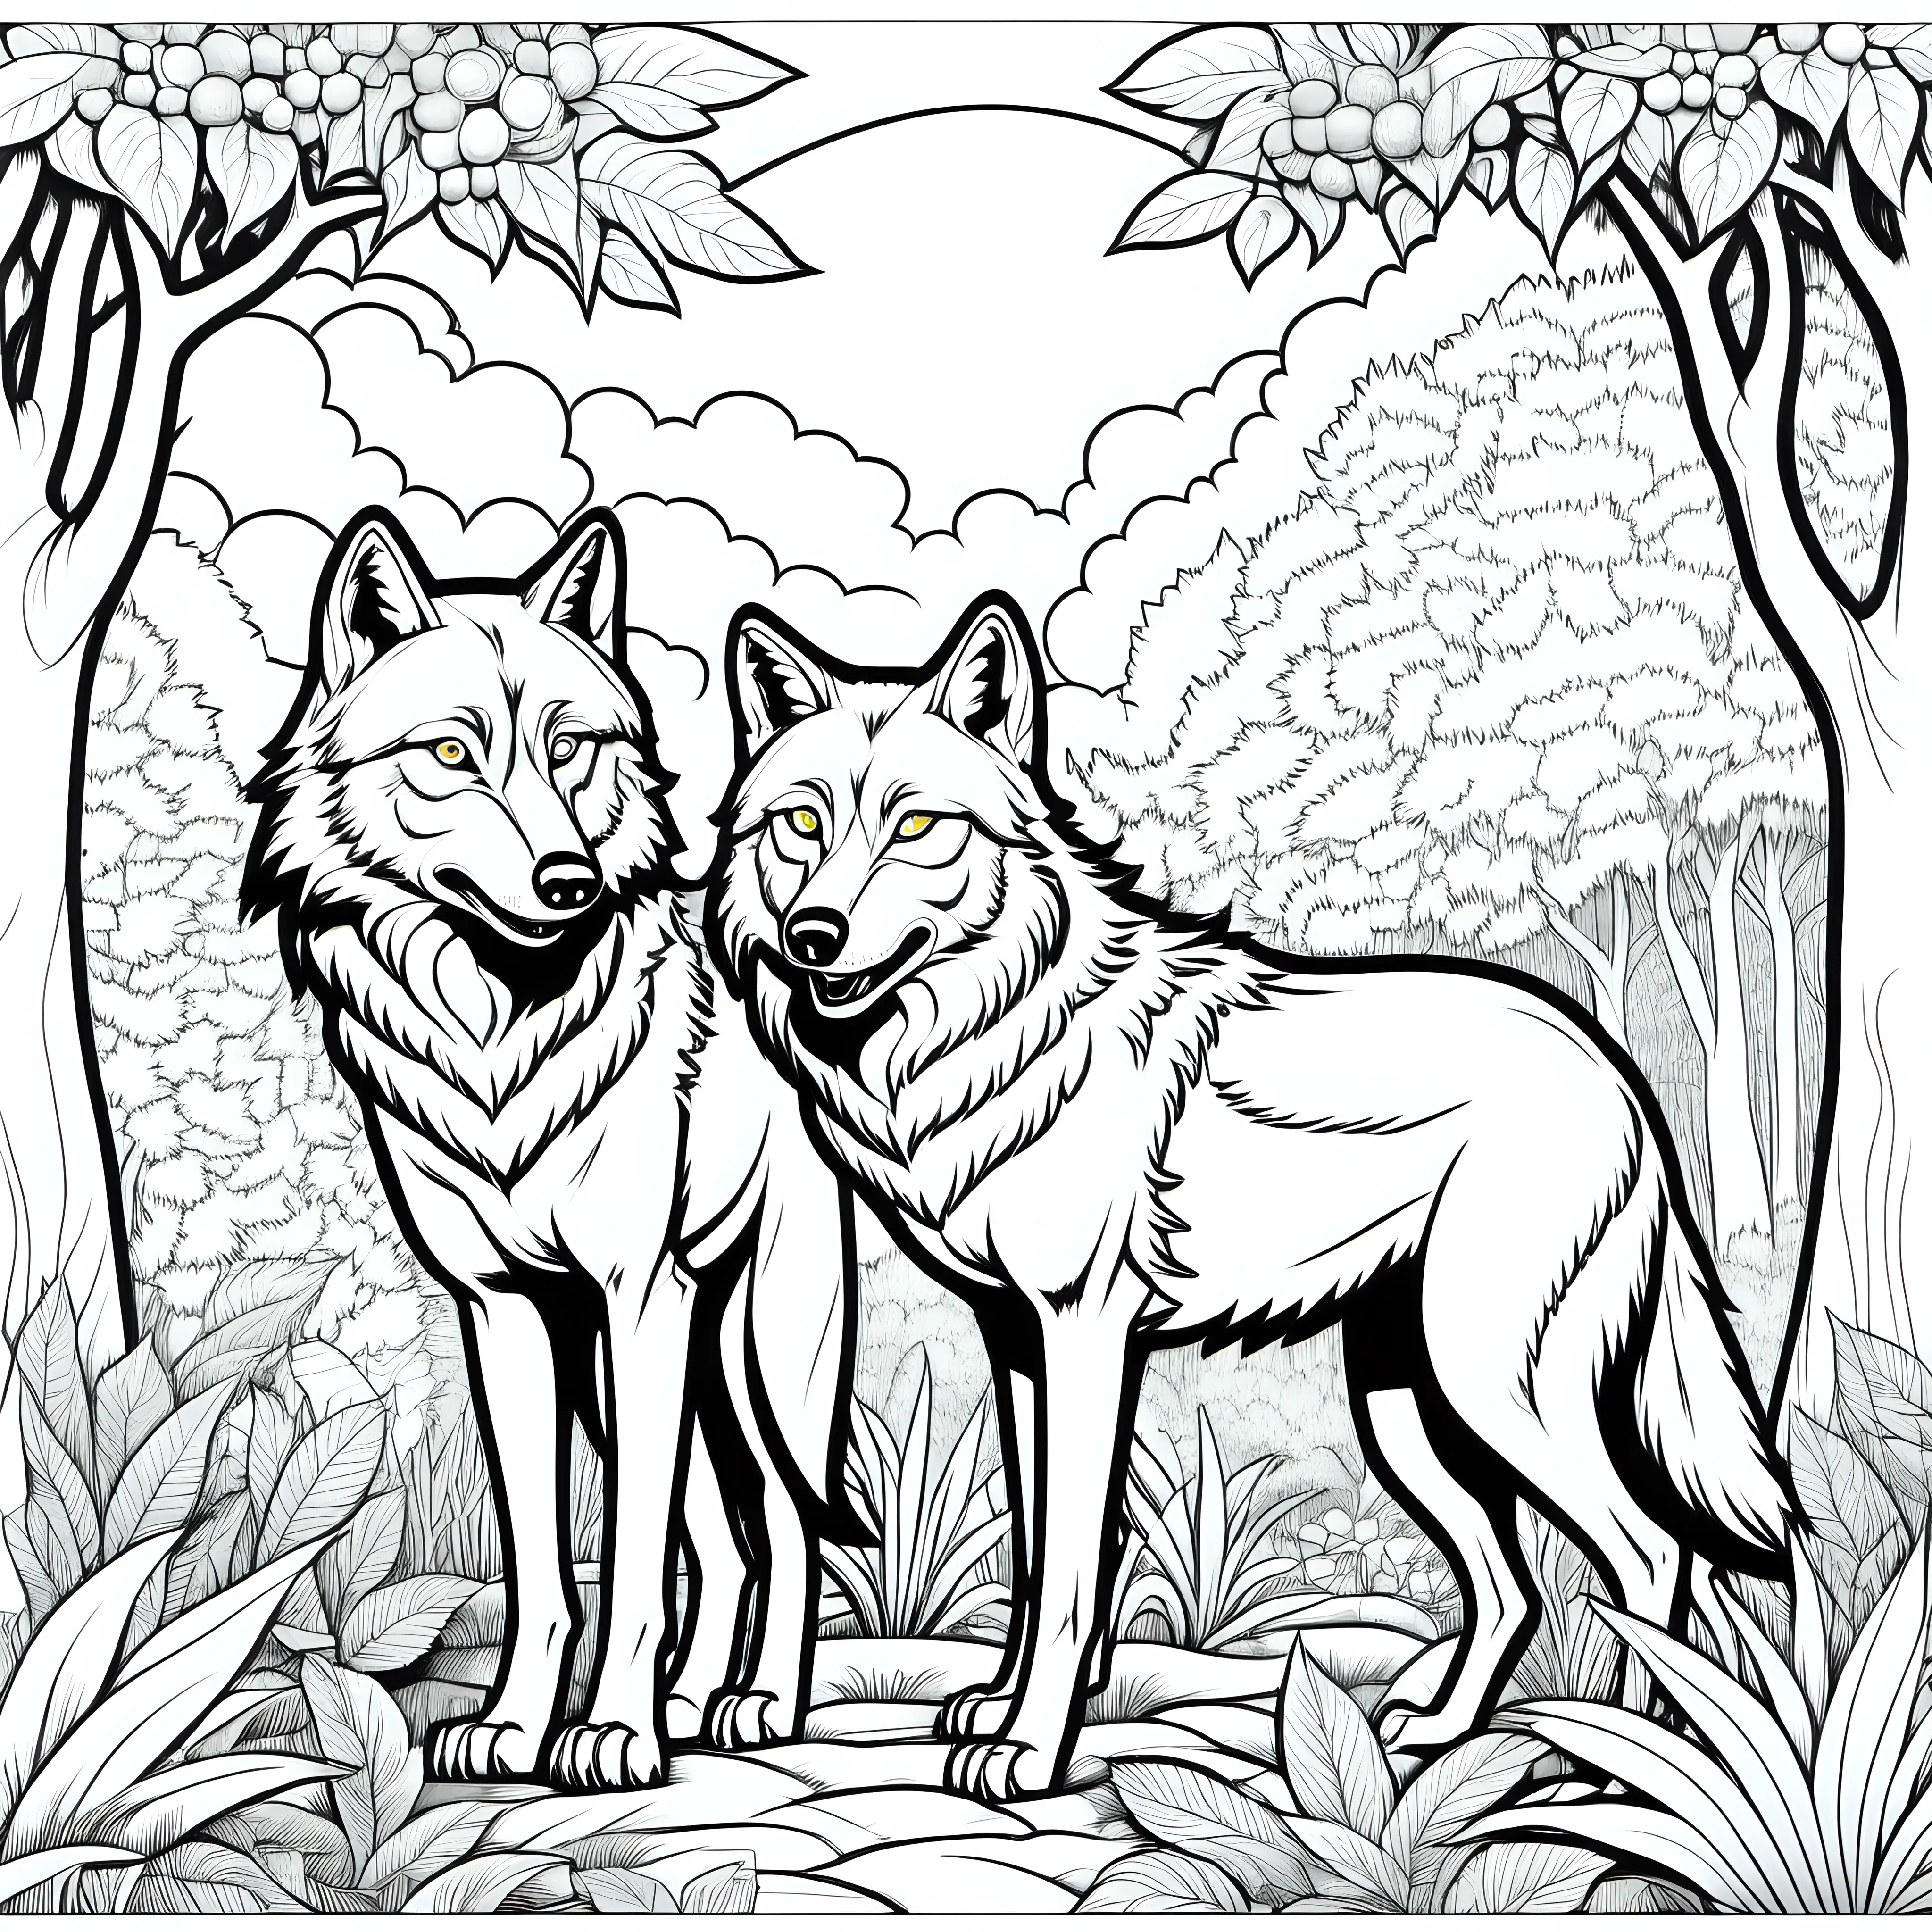 Coloring page for kids, Wolves in Garden of Eden, clean line art